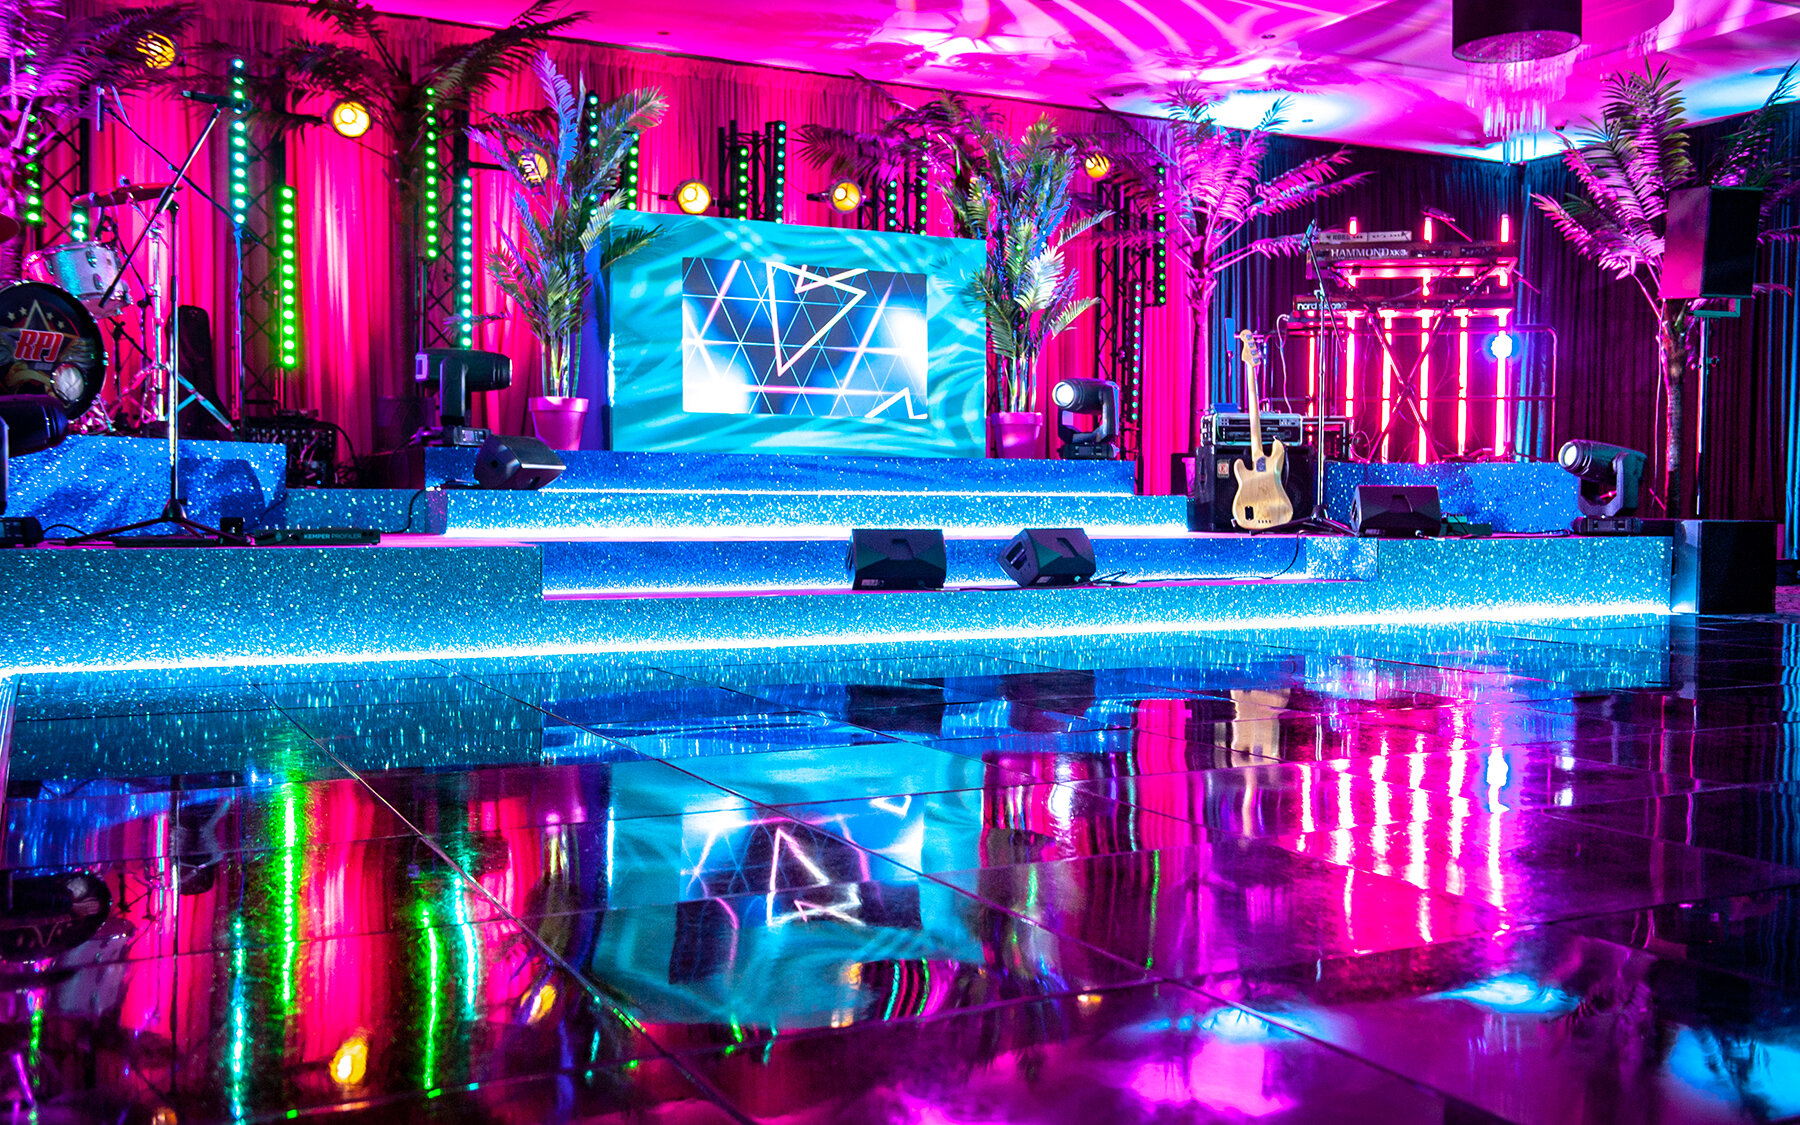 reveries-events-brighton-flowserve-crowne-plaza-hotel-rpjband-corporate-event-party-design-install-production-lighting-sound-staging-setdesign-draping-neon-dance-floor-entertainment-dj-booth-management-o.jpg